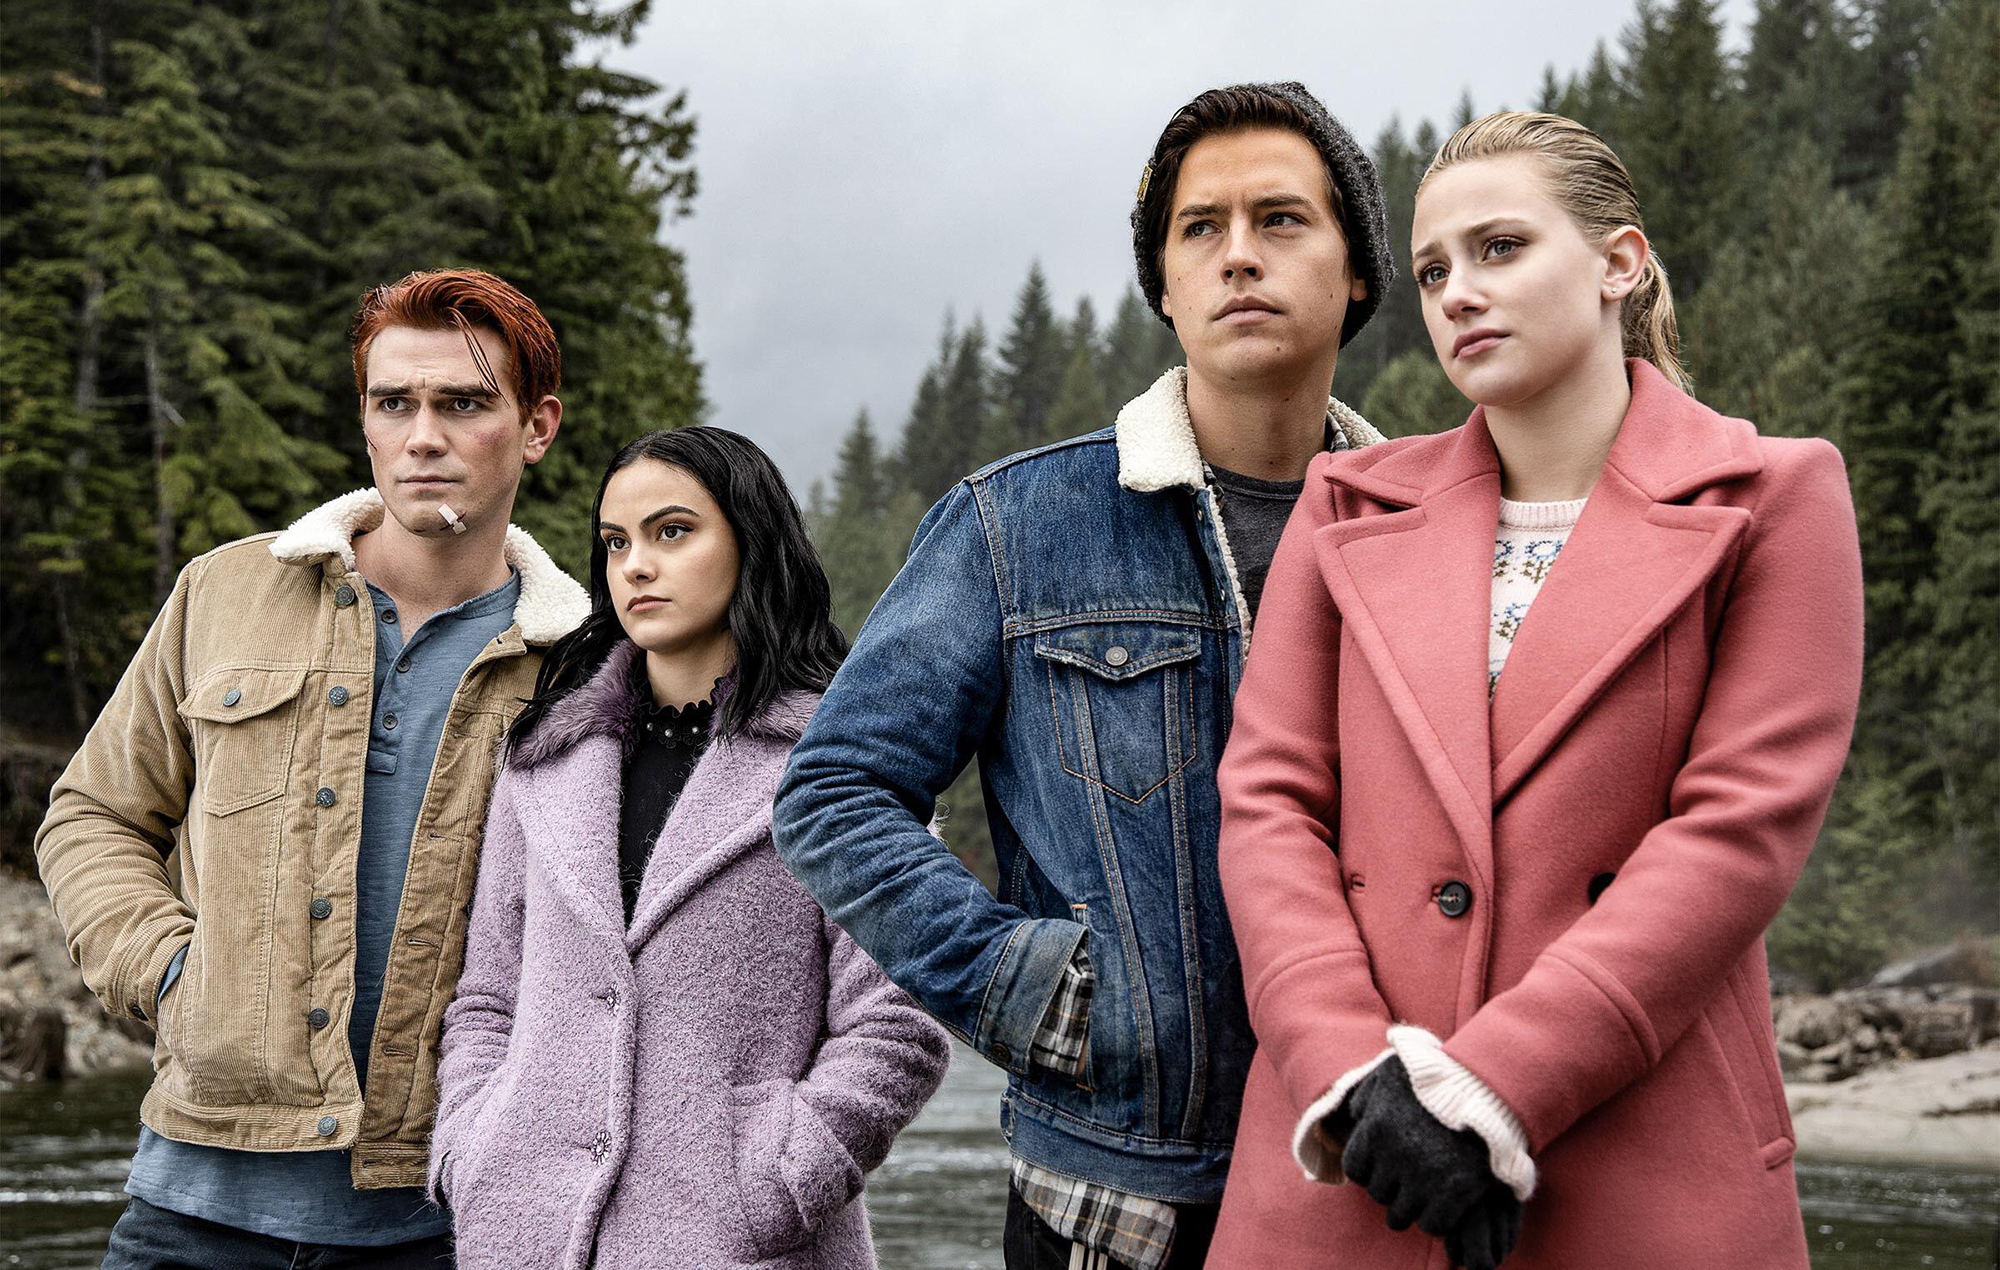 Teens Archie, Betty, Veronica, and Jughead from Riverdale staring into the stance. 